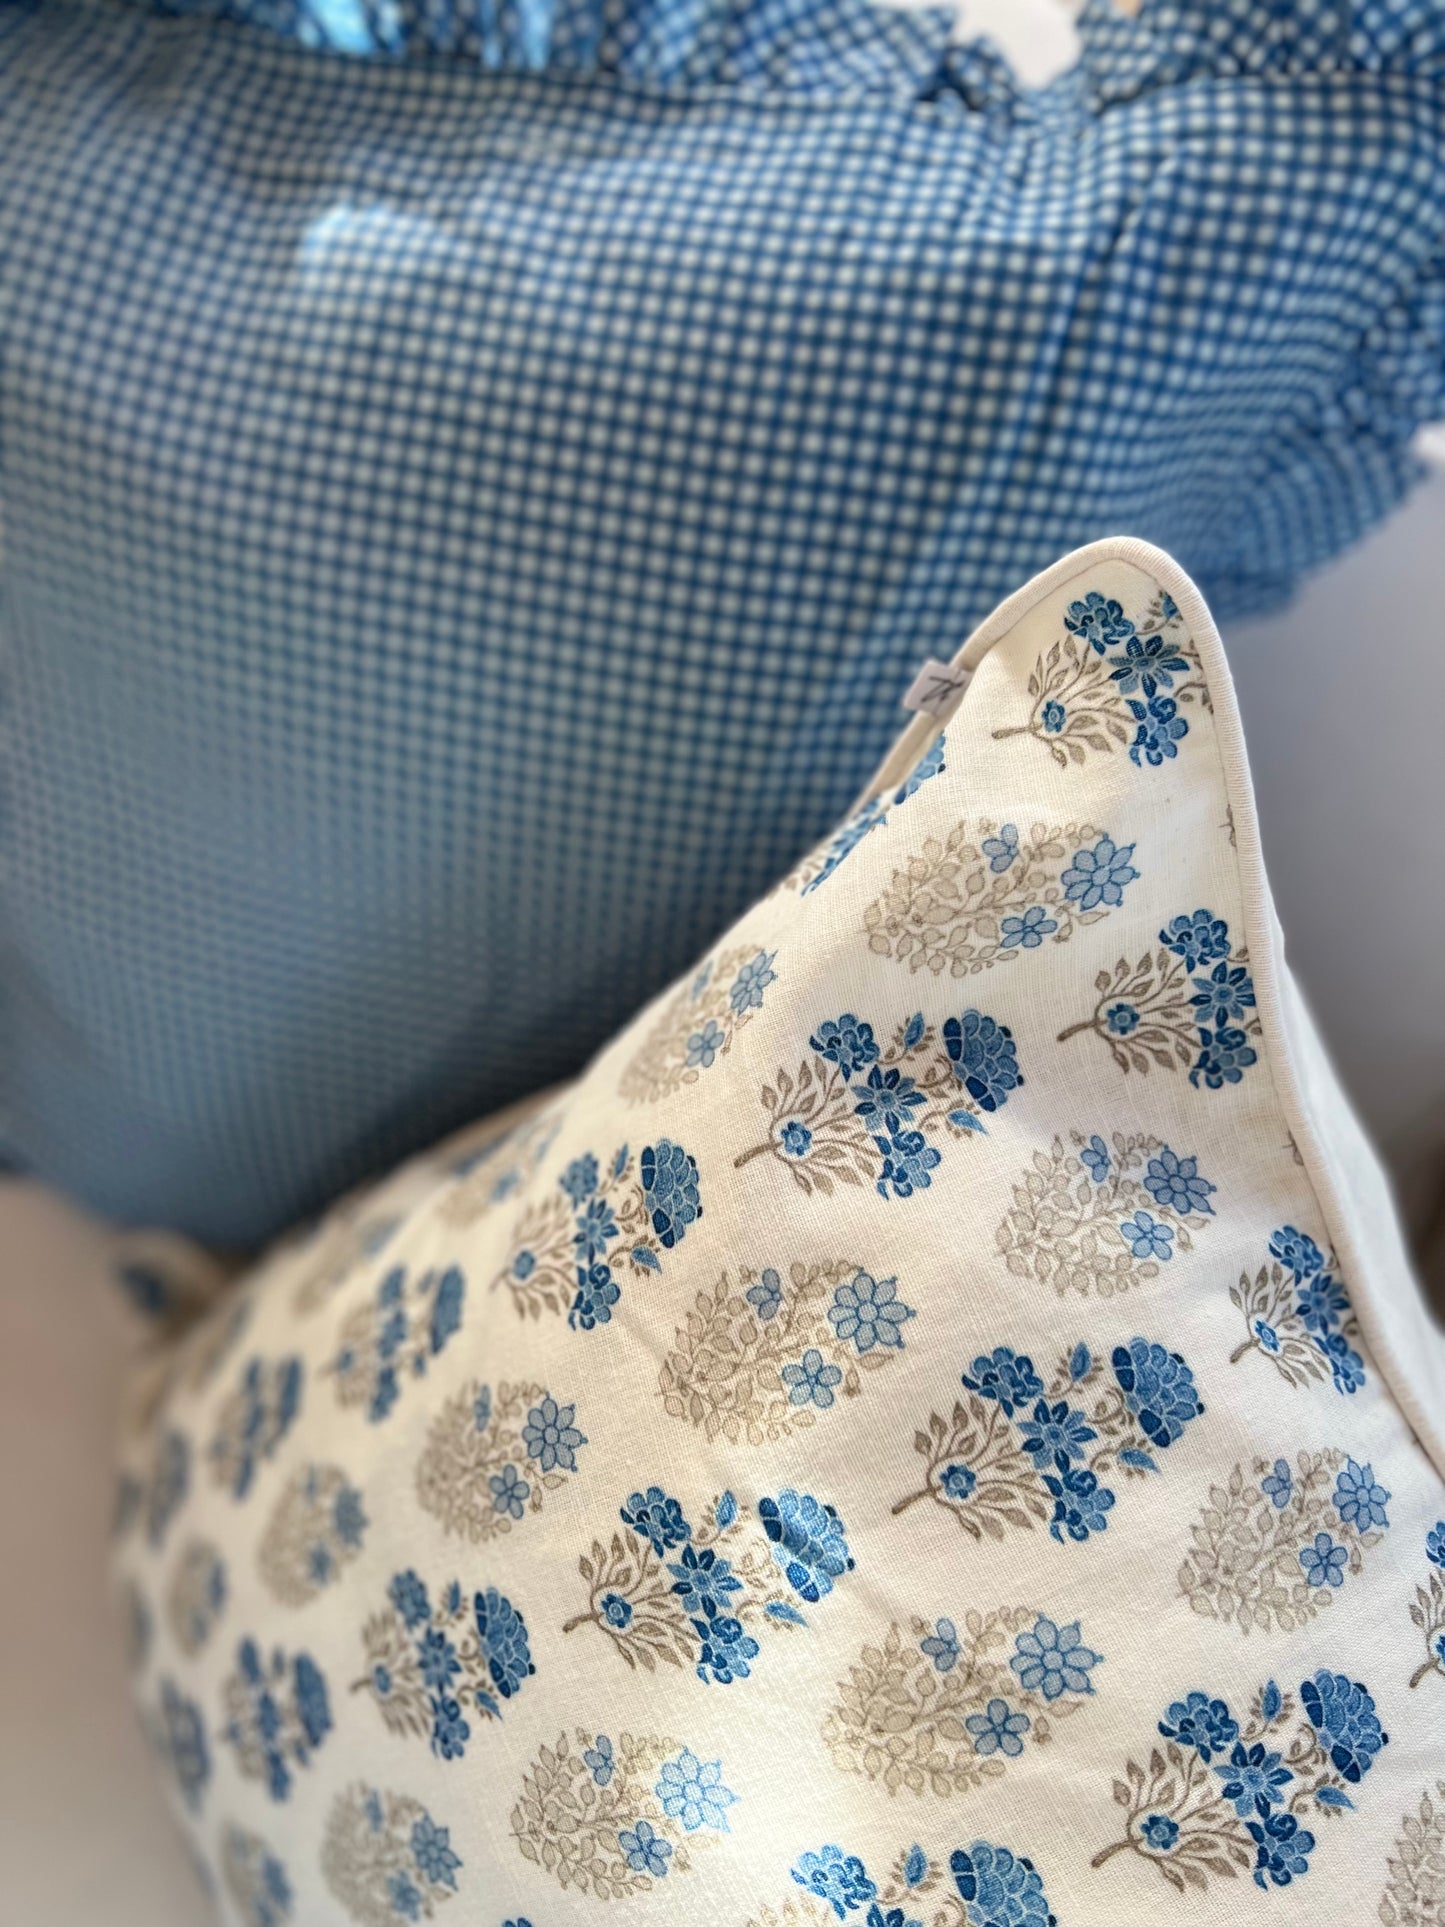 Vivienne Mughal Flower Pillow Cover in Blue